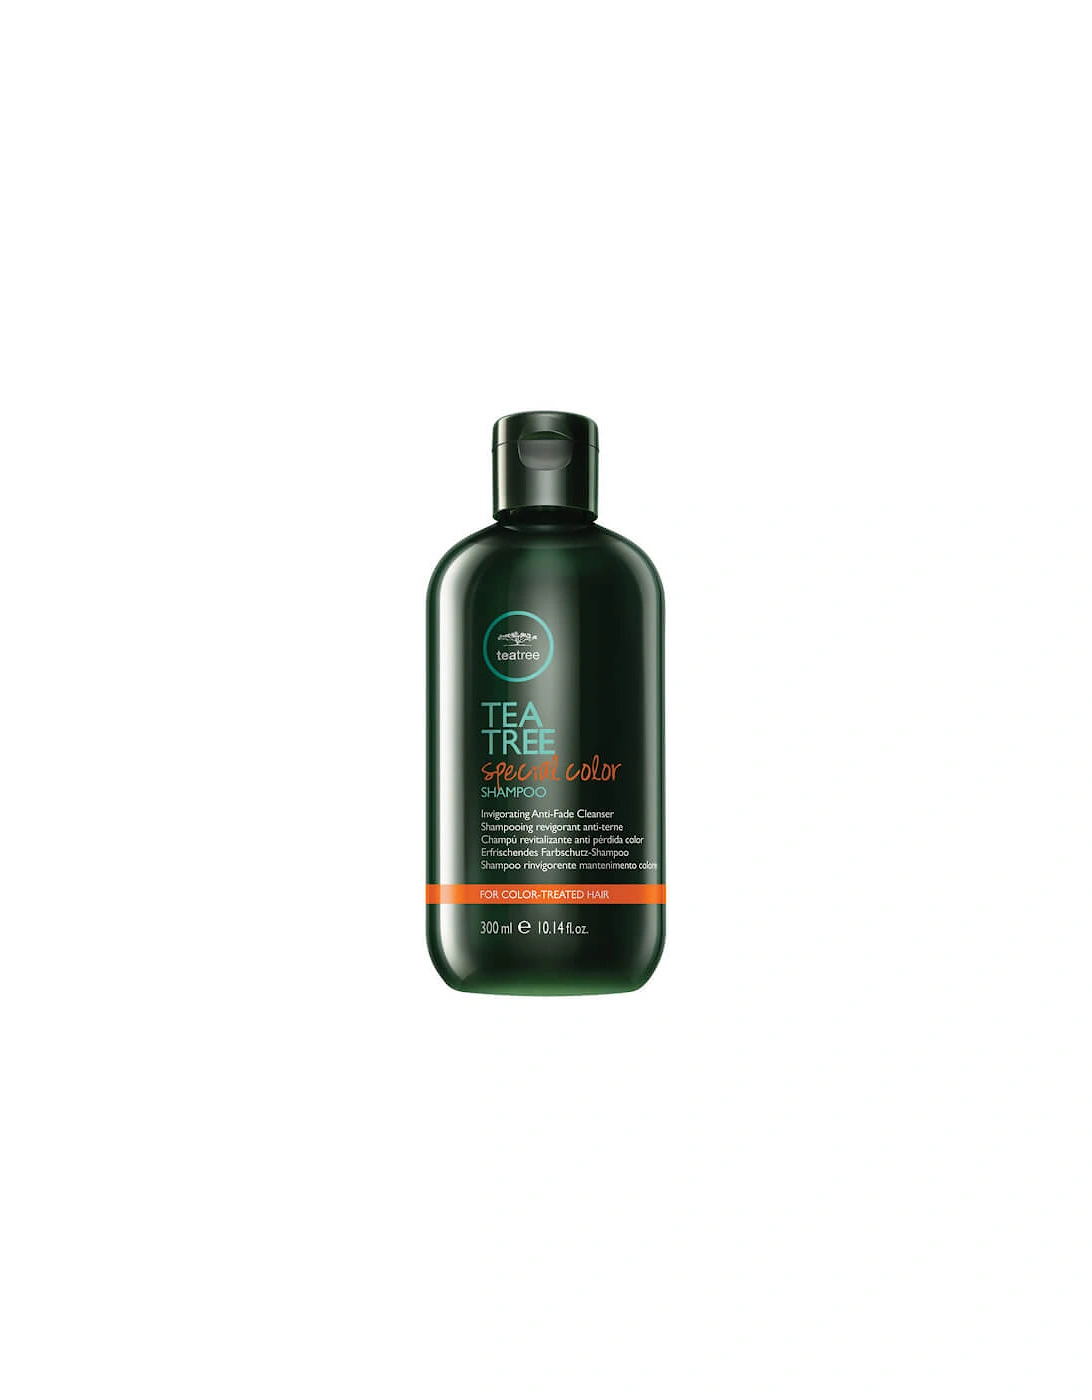 Tea Tree Special Color Shampoo 300ml - Paul Mitchell, 2 of 1